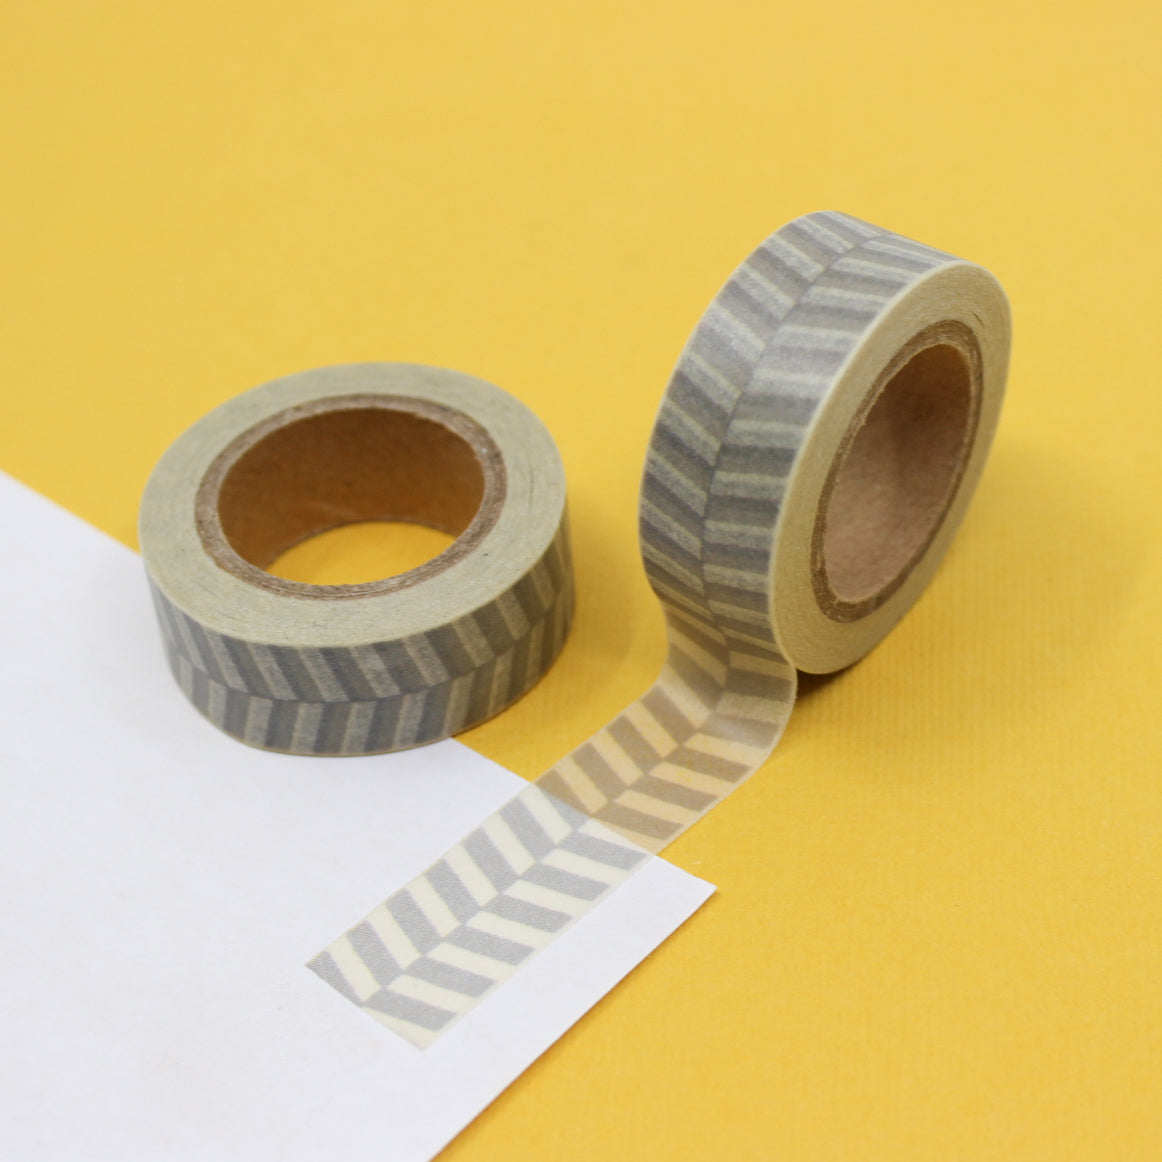 This fun and unique grey chevron color block pattern resemble a zipper. It will make a super cute addition to your washi collection. We sell this style of chevron tape in Yellow, brown and grey in our shop. This tape is sold at BBB Supplies Craft Shop.